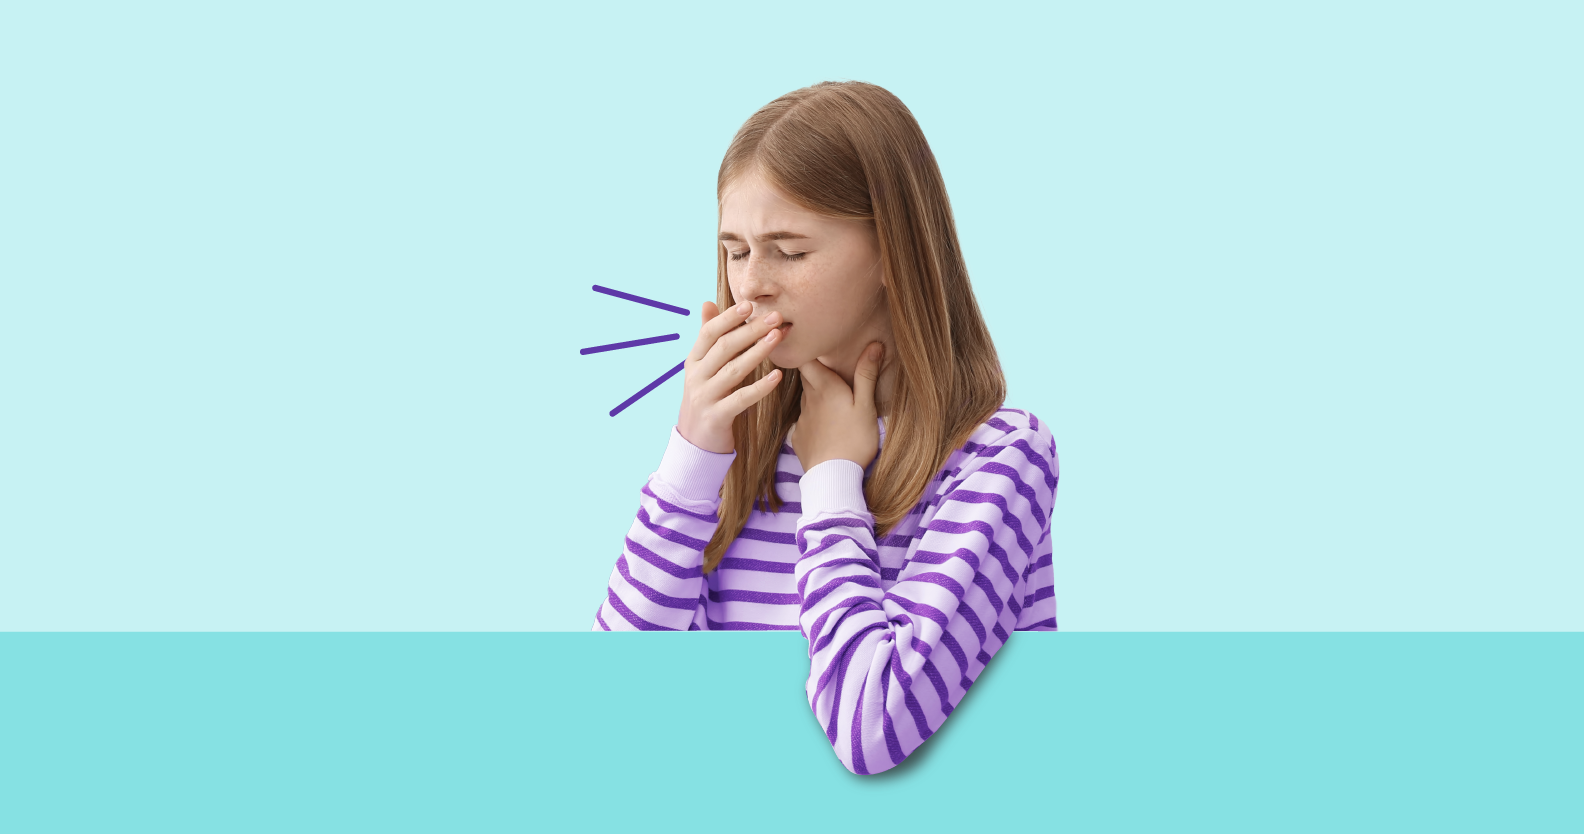 A parent’s guide: upper respiratory infections